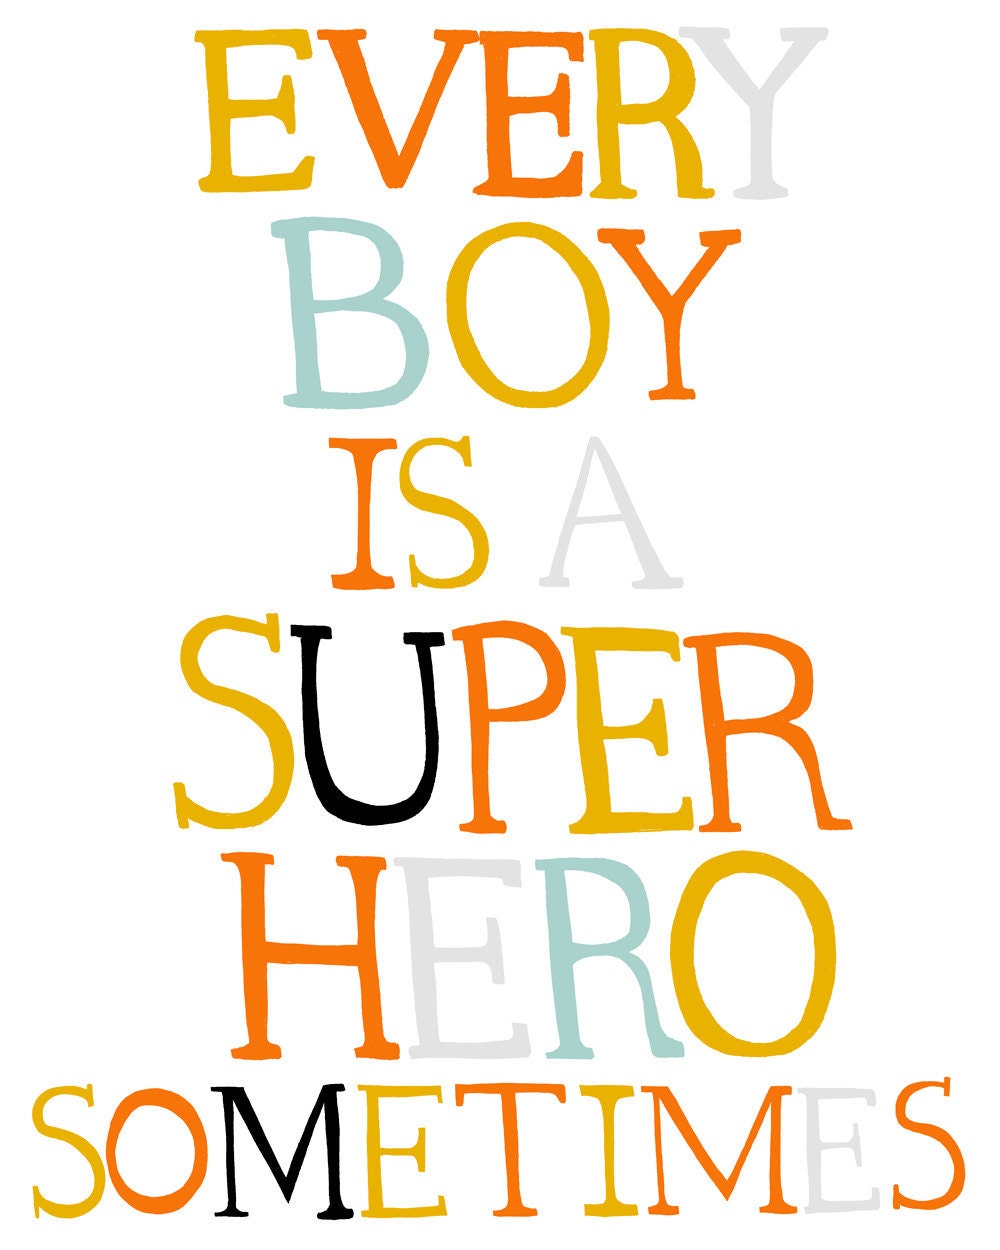 Every Boy is a Super Hero Sometimes (type)